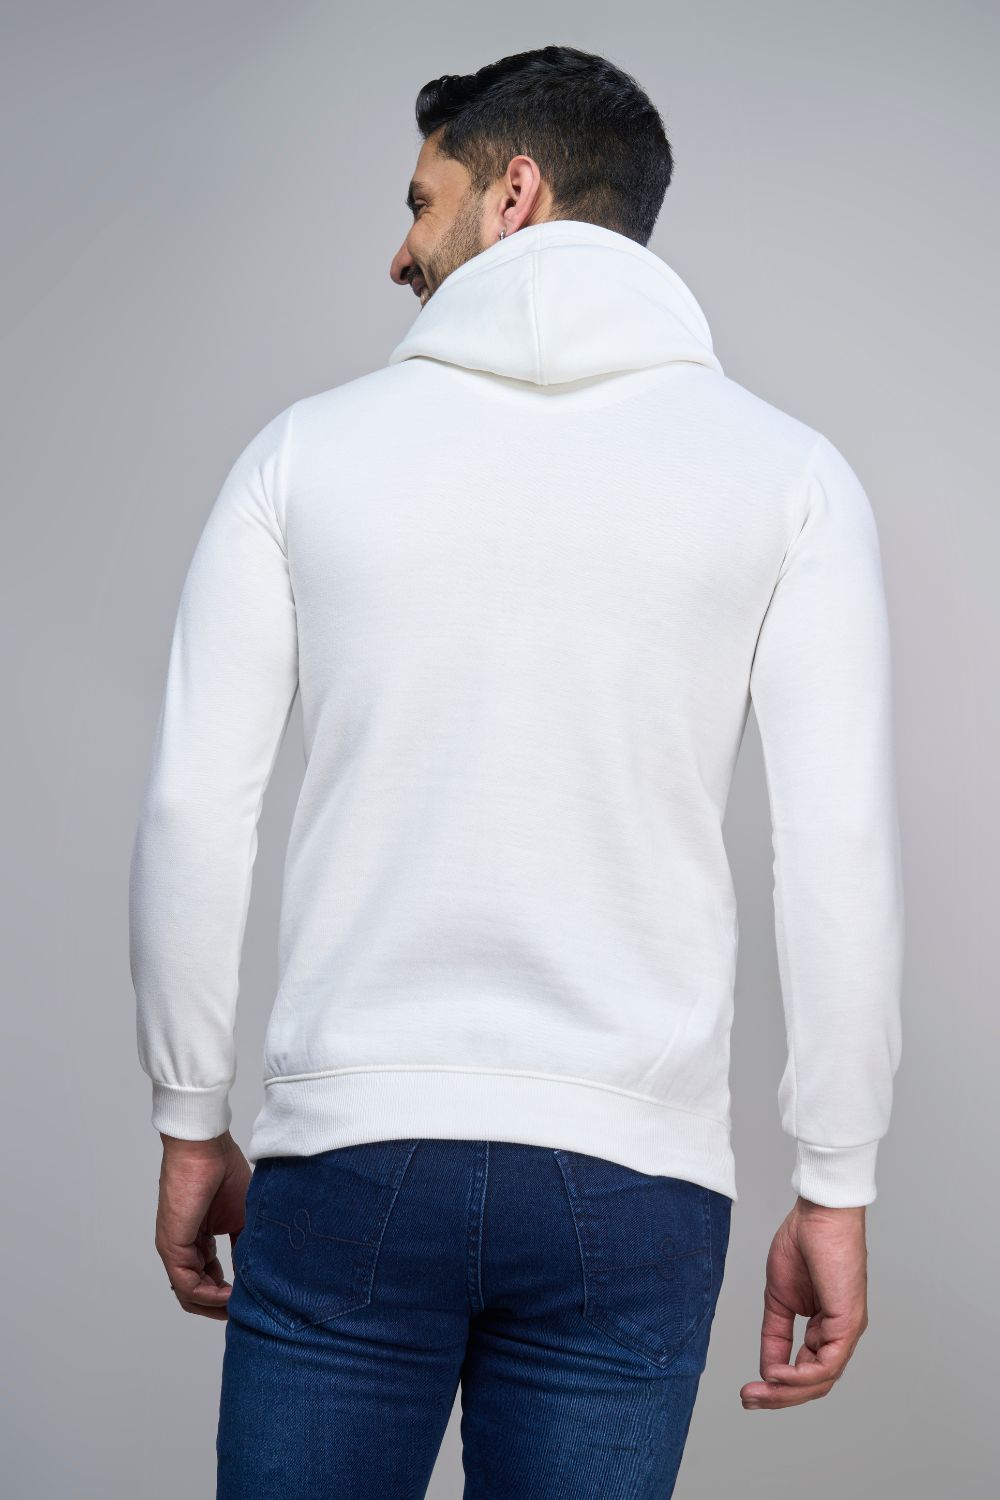 White colored, hoodie for men with full sleeves and relaxed fit, back view.